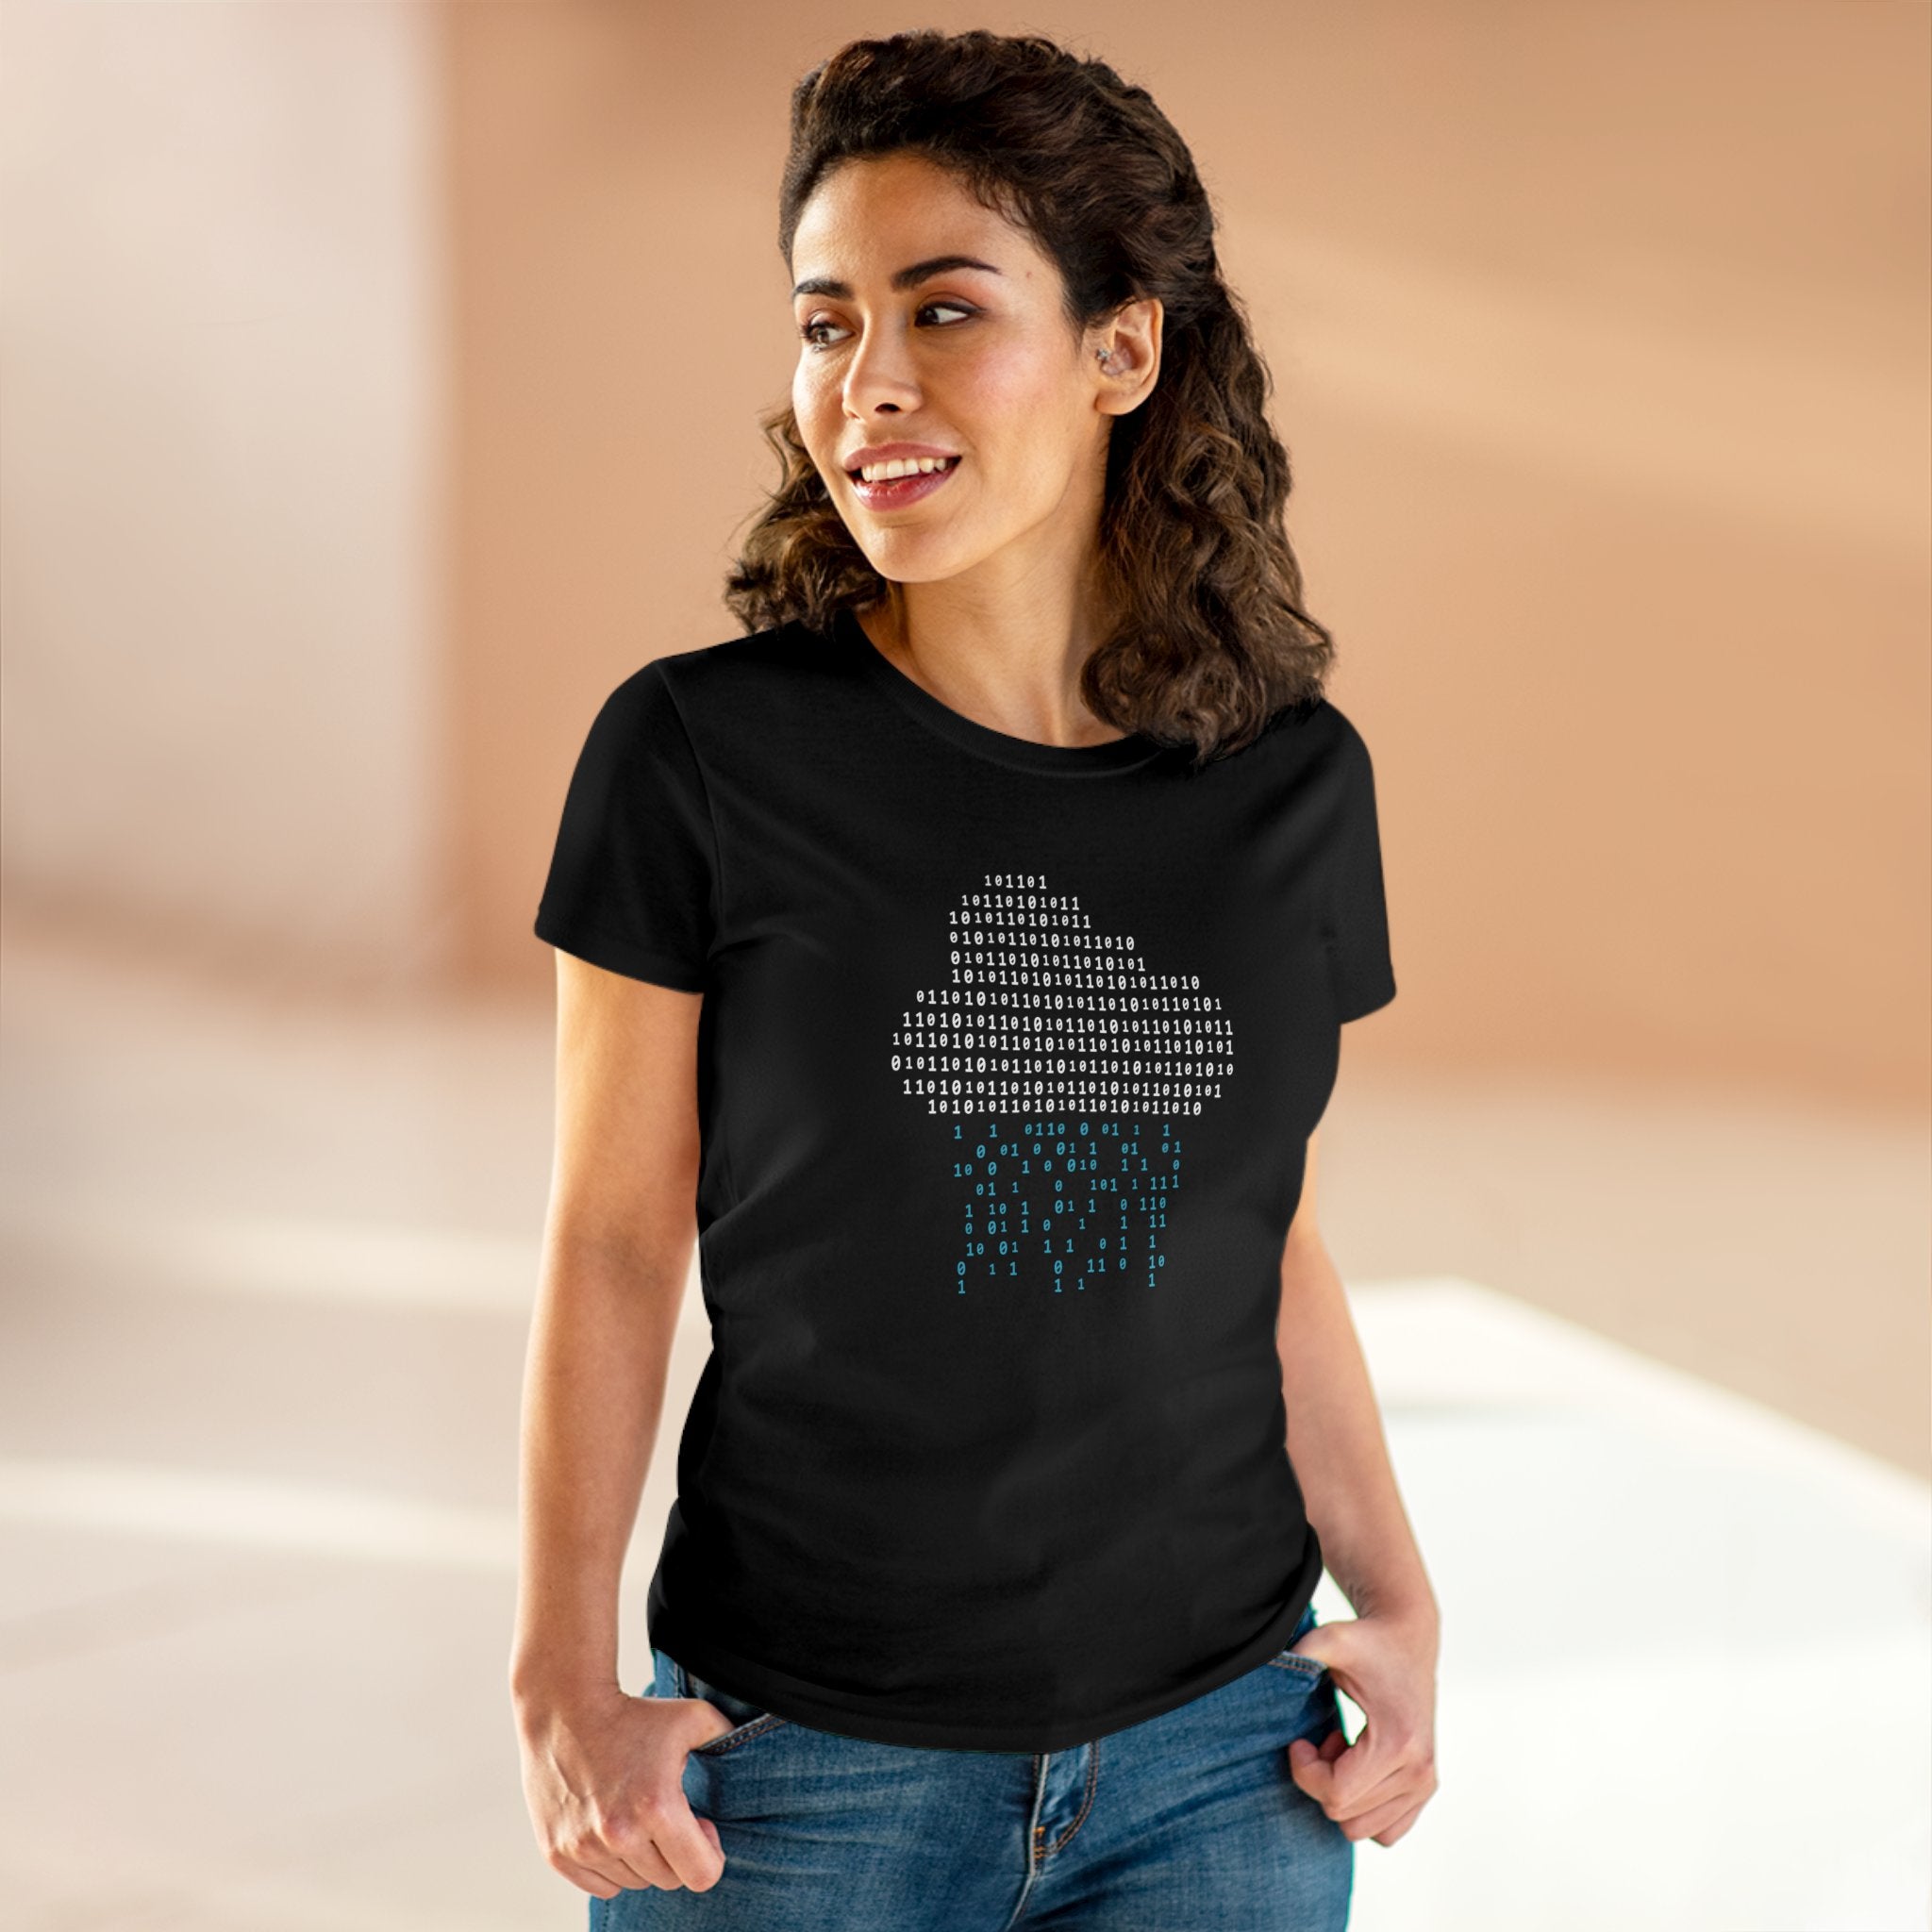 A woman with curly hair is wearing a black Binary Rain Cloud - Women's Tee. She is standing and smiling in a brightly lit indoor space.